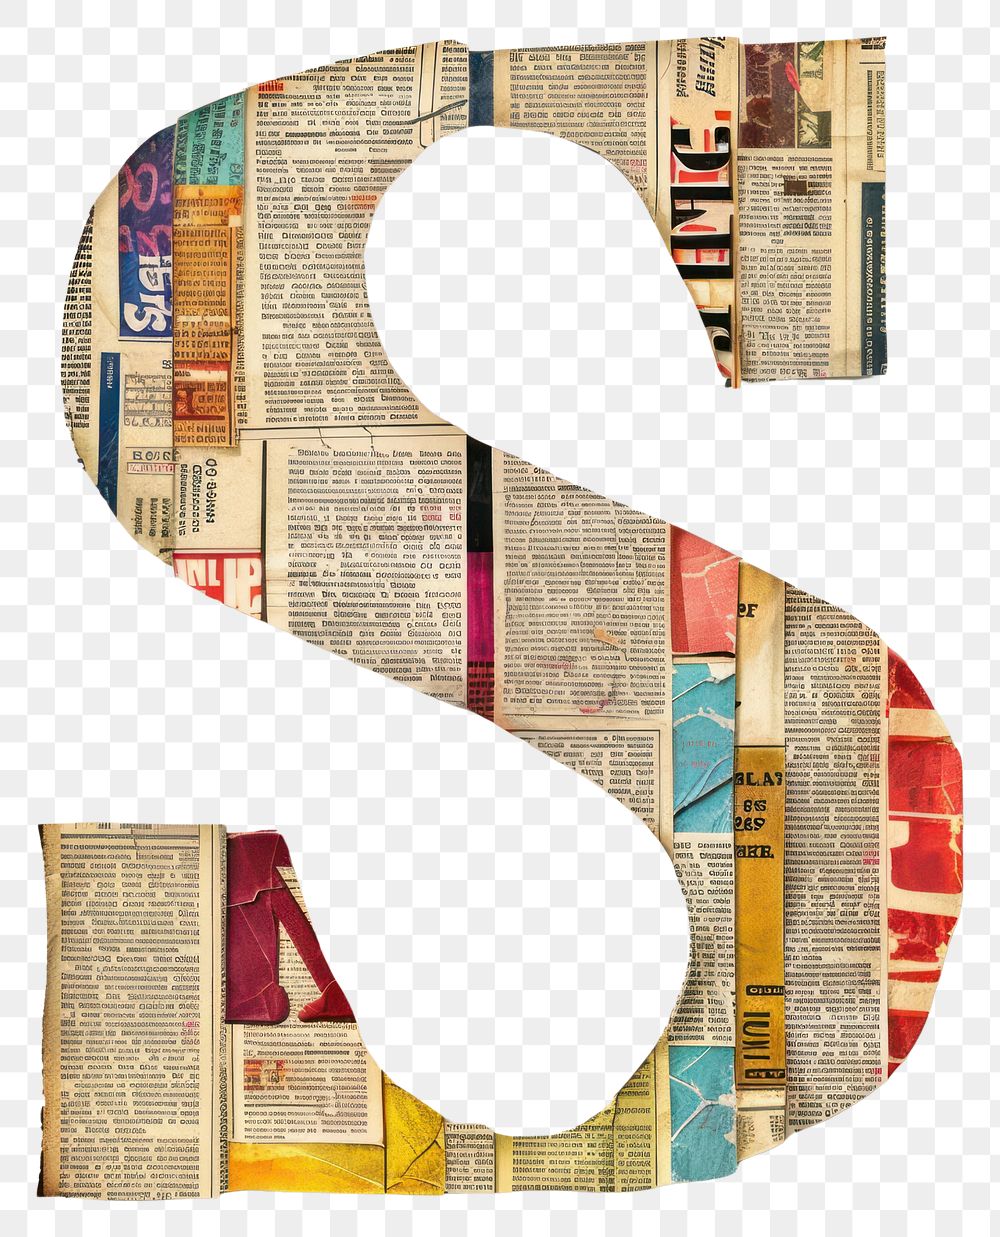 Magazine paper letter S collage number text.